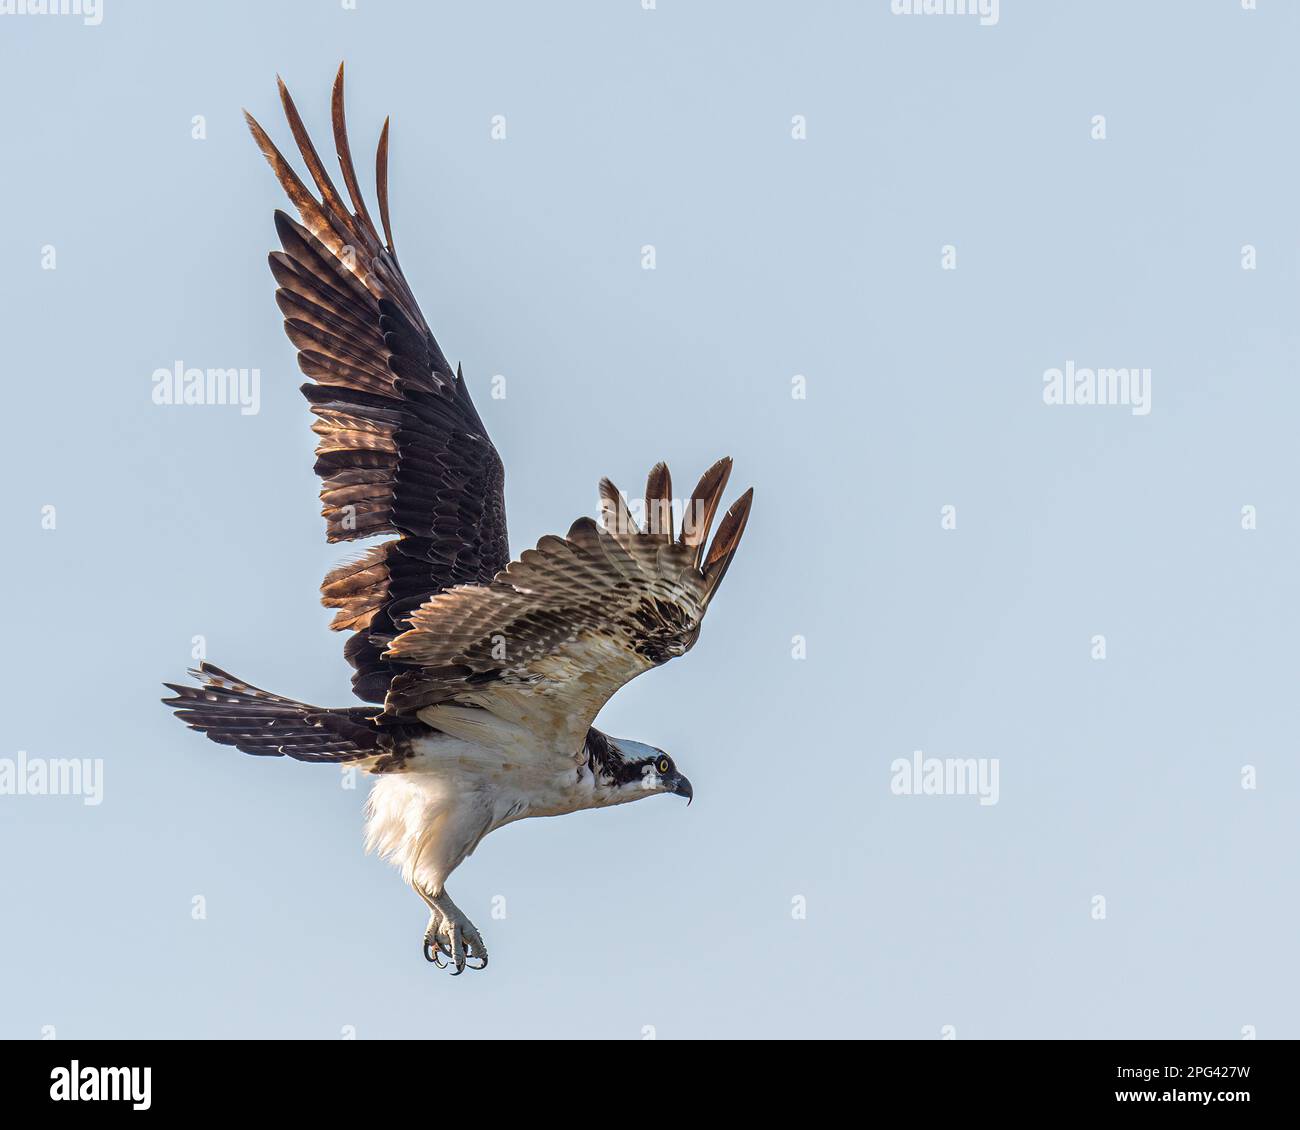 An Osprey (Pandion haliaetus) in flight against a clear sky in the Florida Keys, USA. Stock Photo